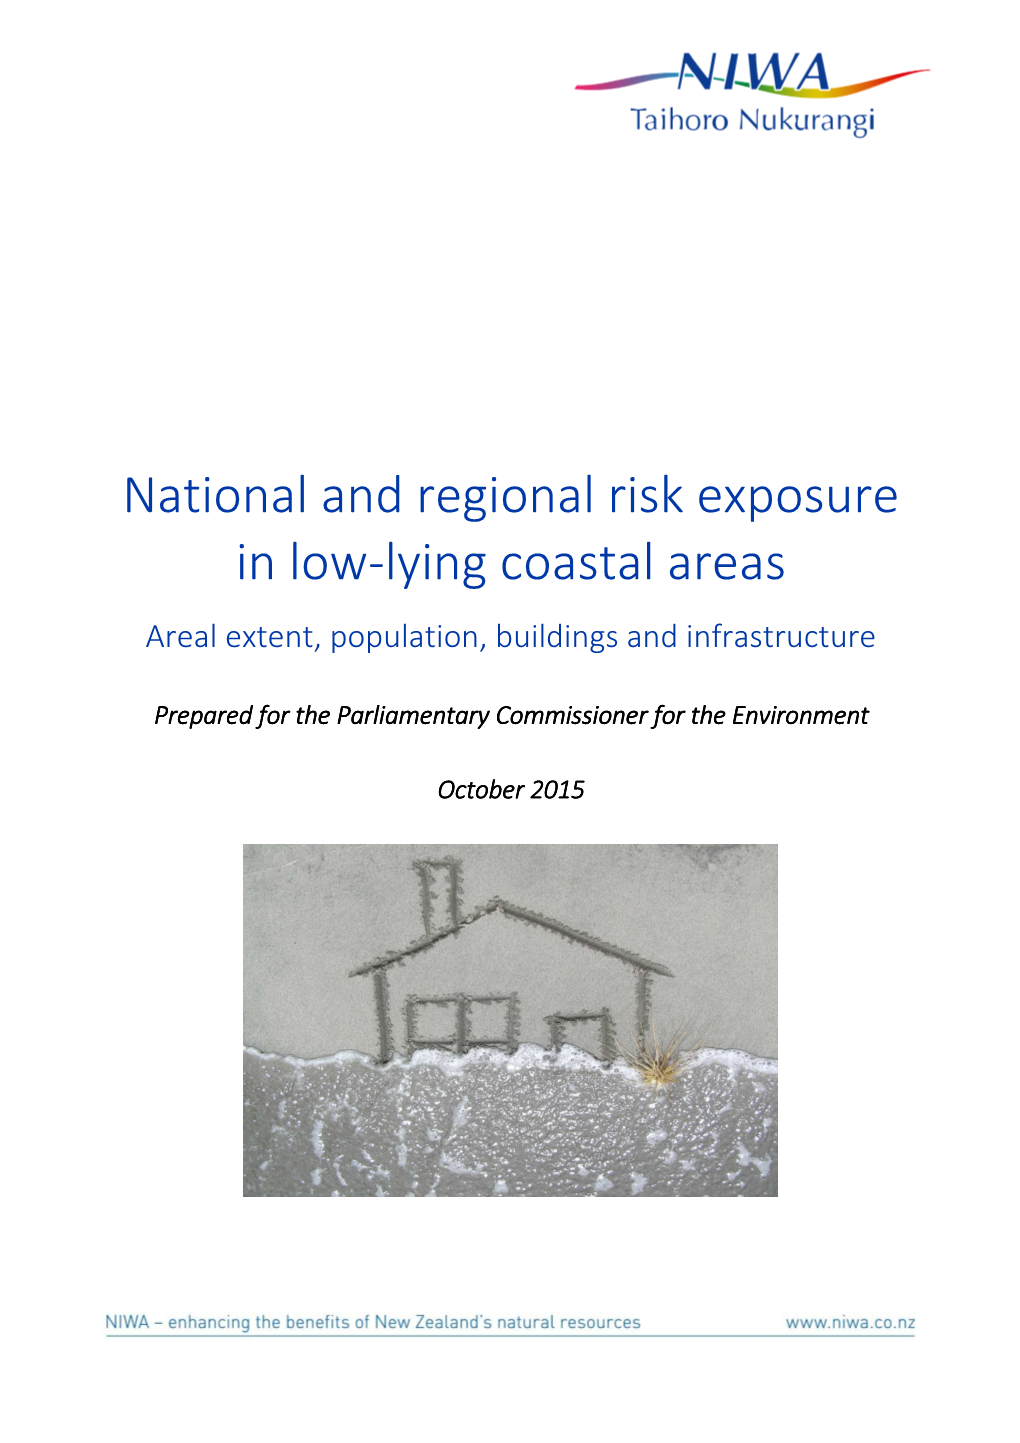 National and Regional Risk Exposure in Low-Lying Coastal Areas Areal Extent, Population, Buildings and Infrastructure